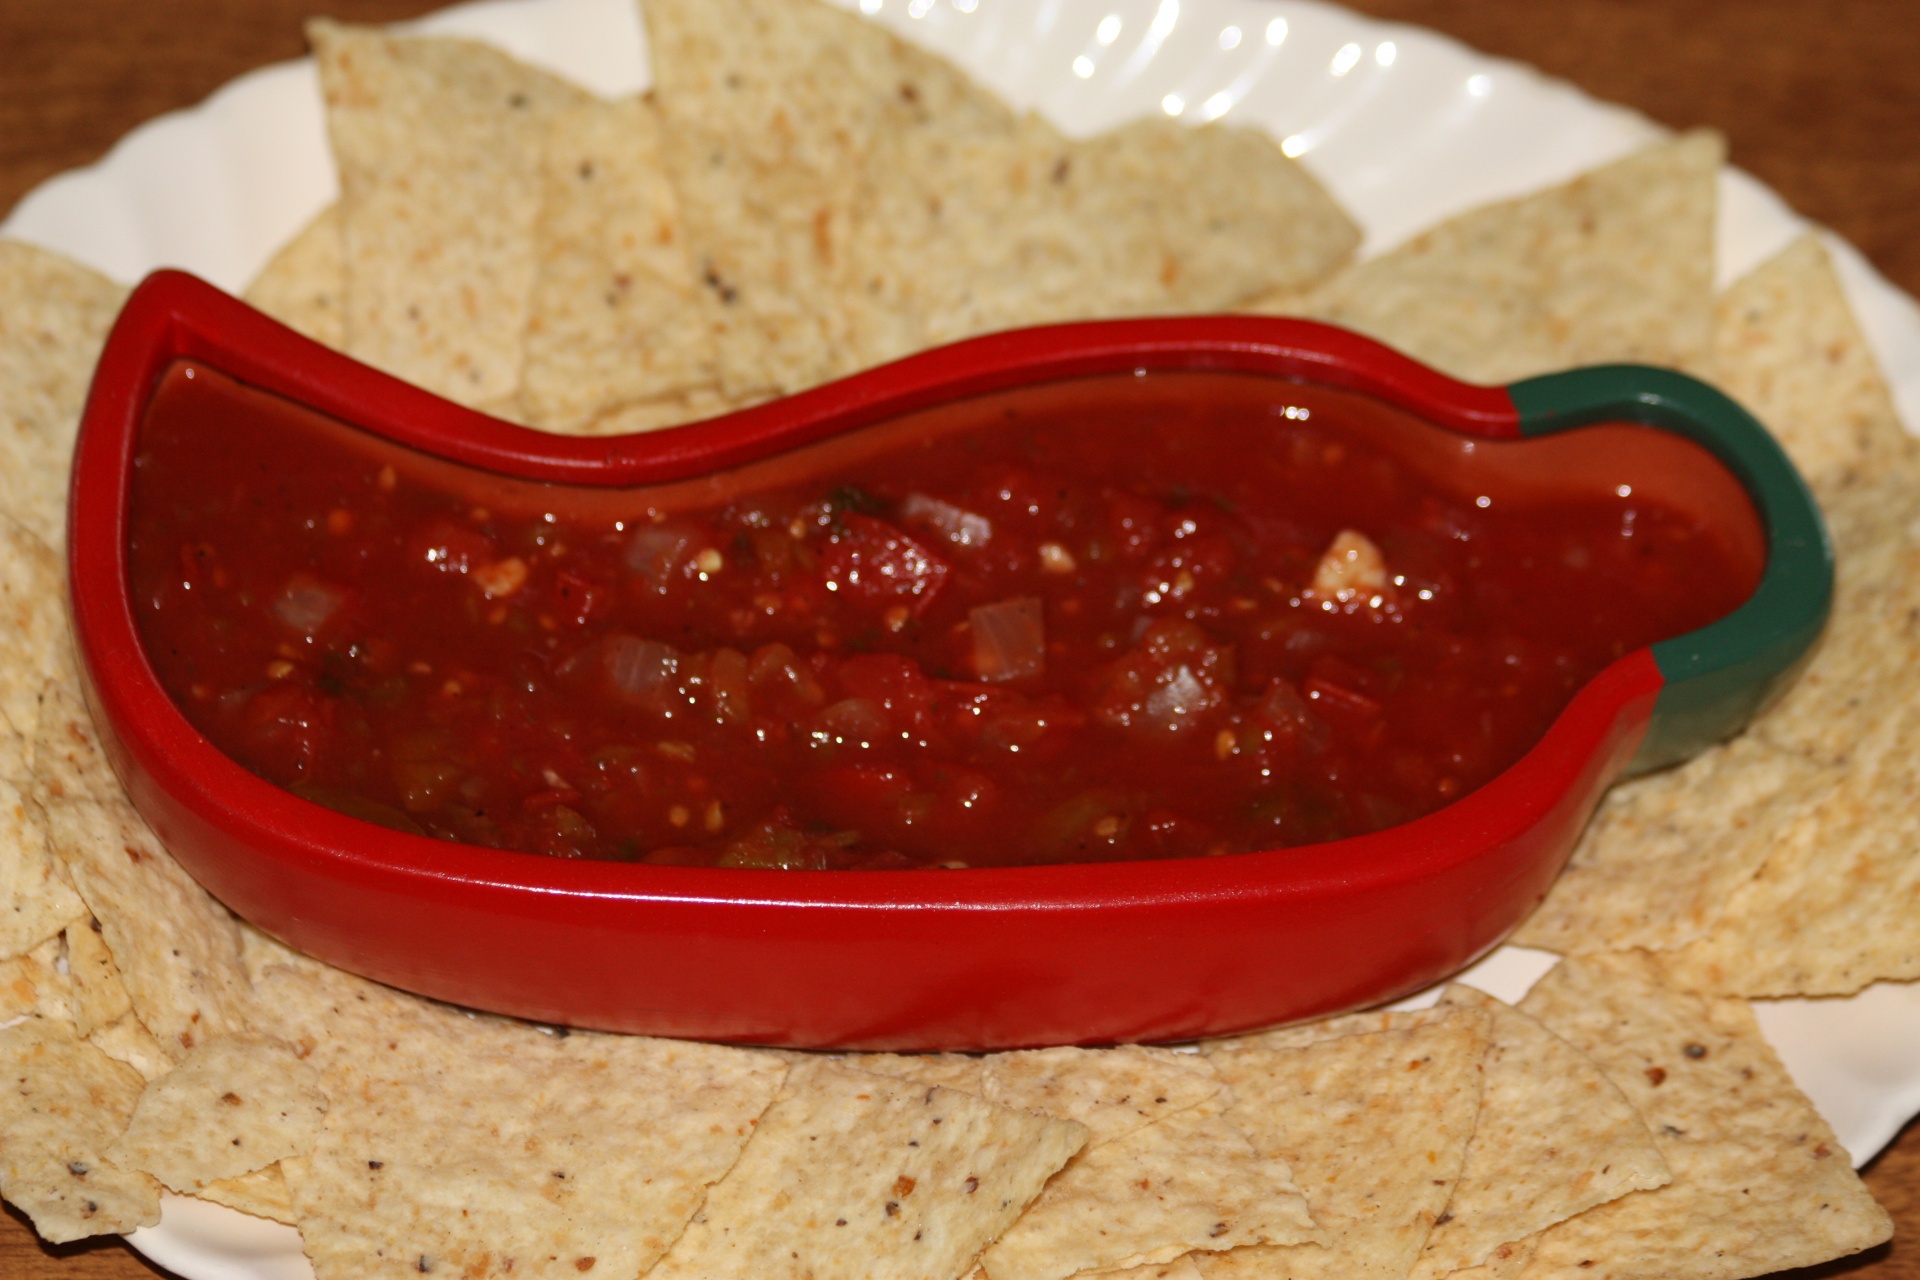 Home made picante sauce in a red chili pepper bowl, surrounded by chips, on a platter.